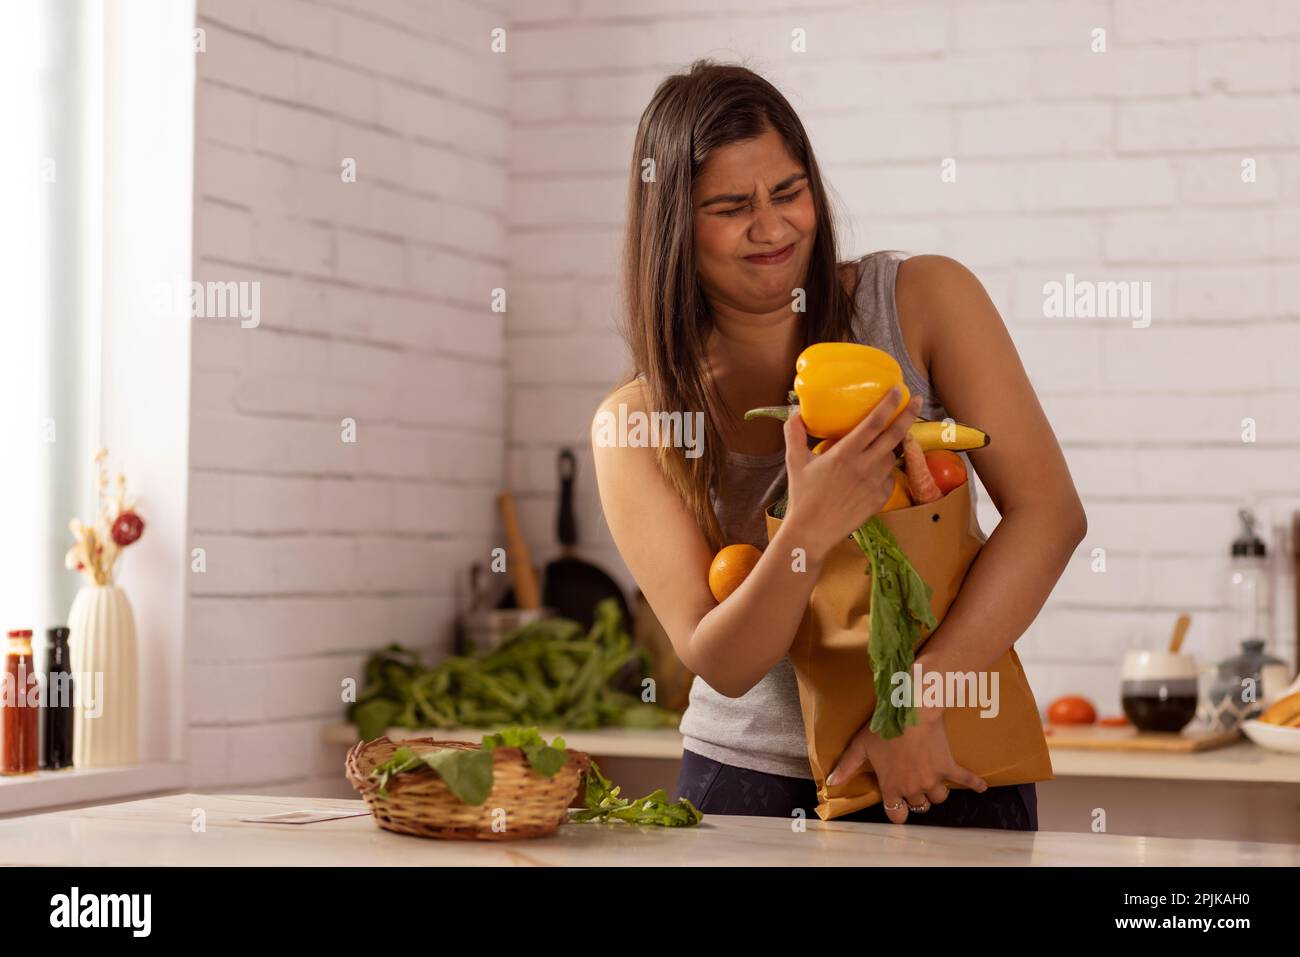 Woman standing in kitchen holding a heavy bag of vegetables Stock Photo